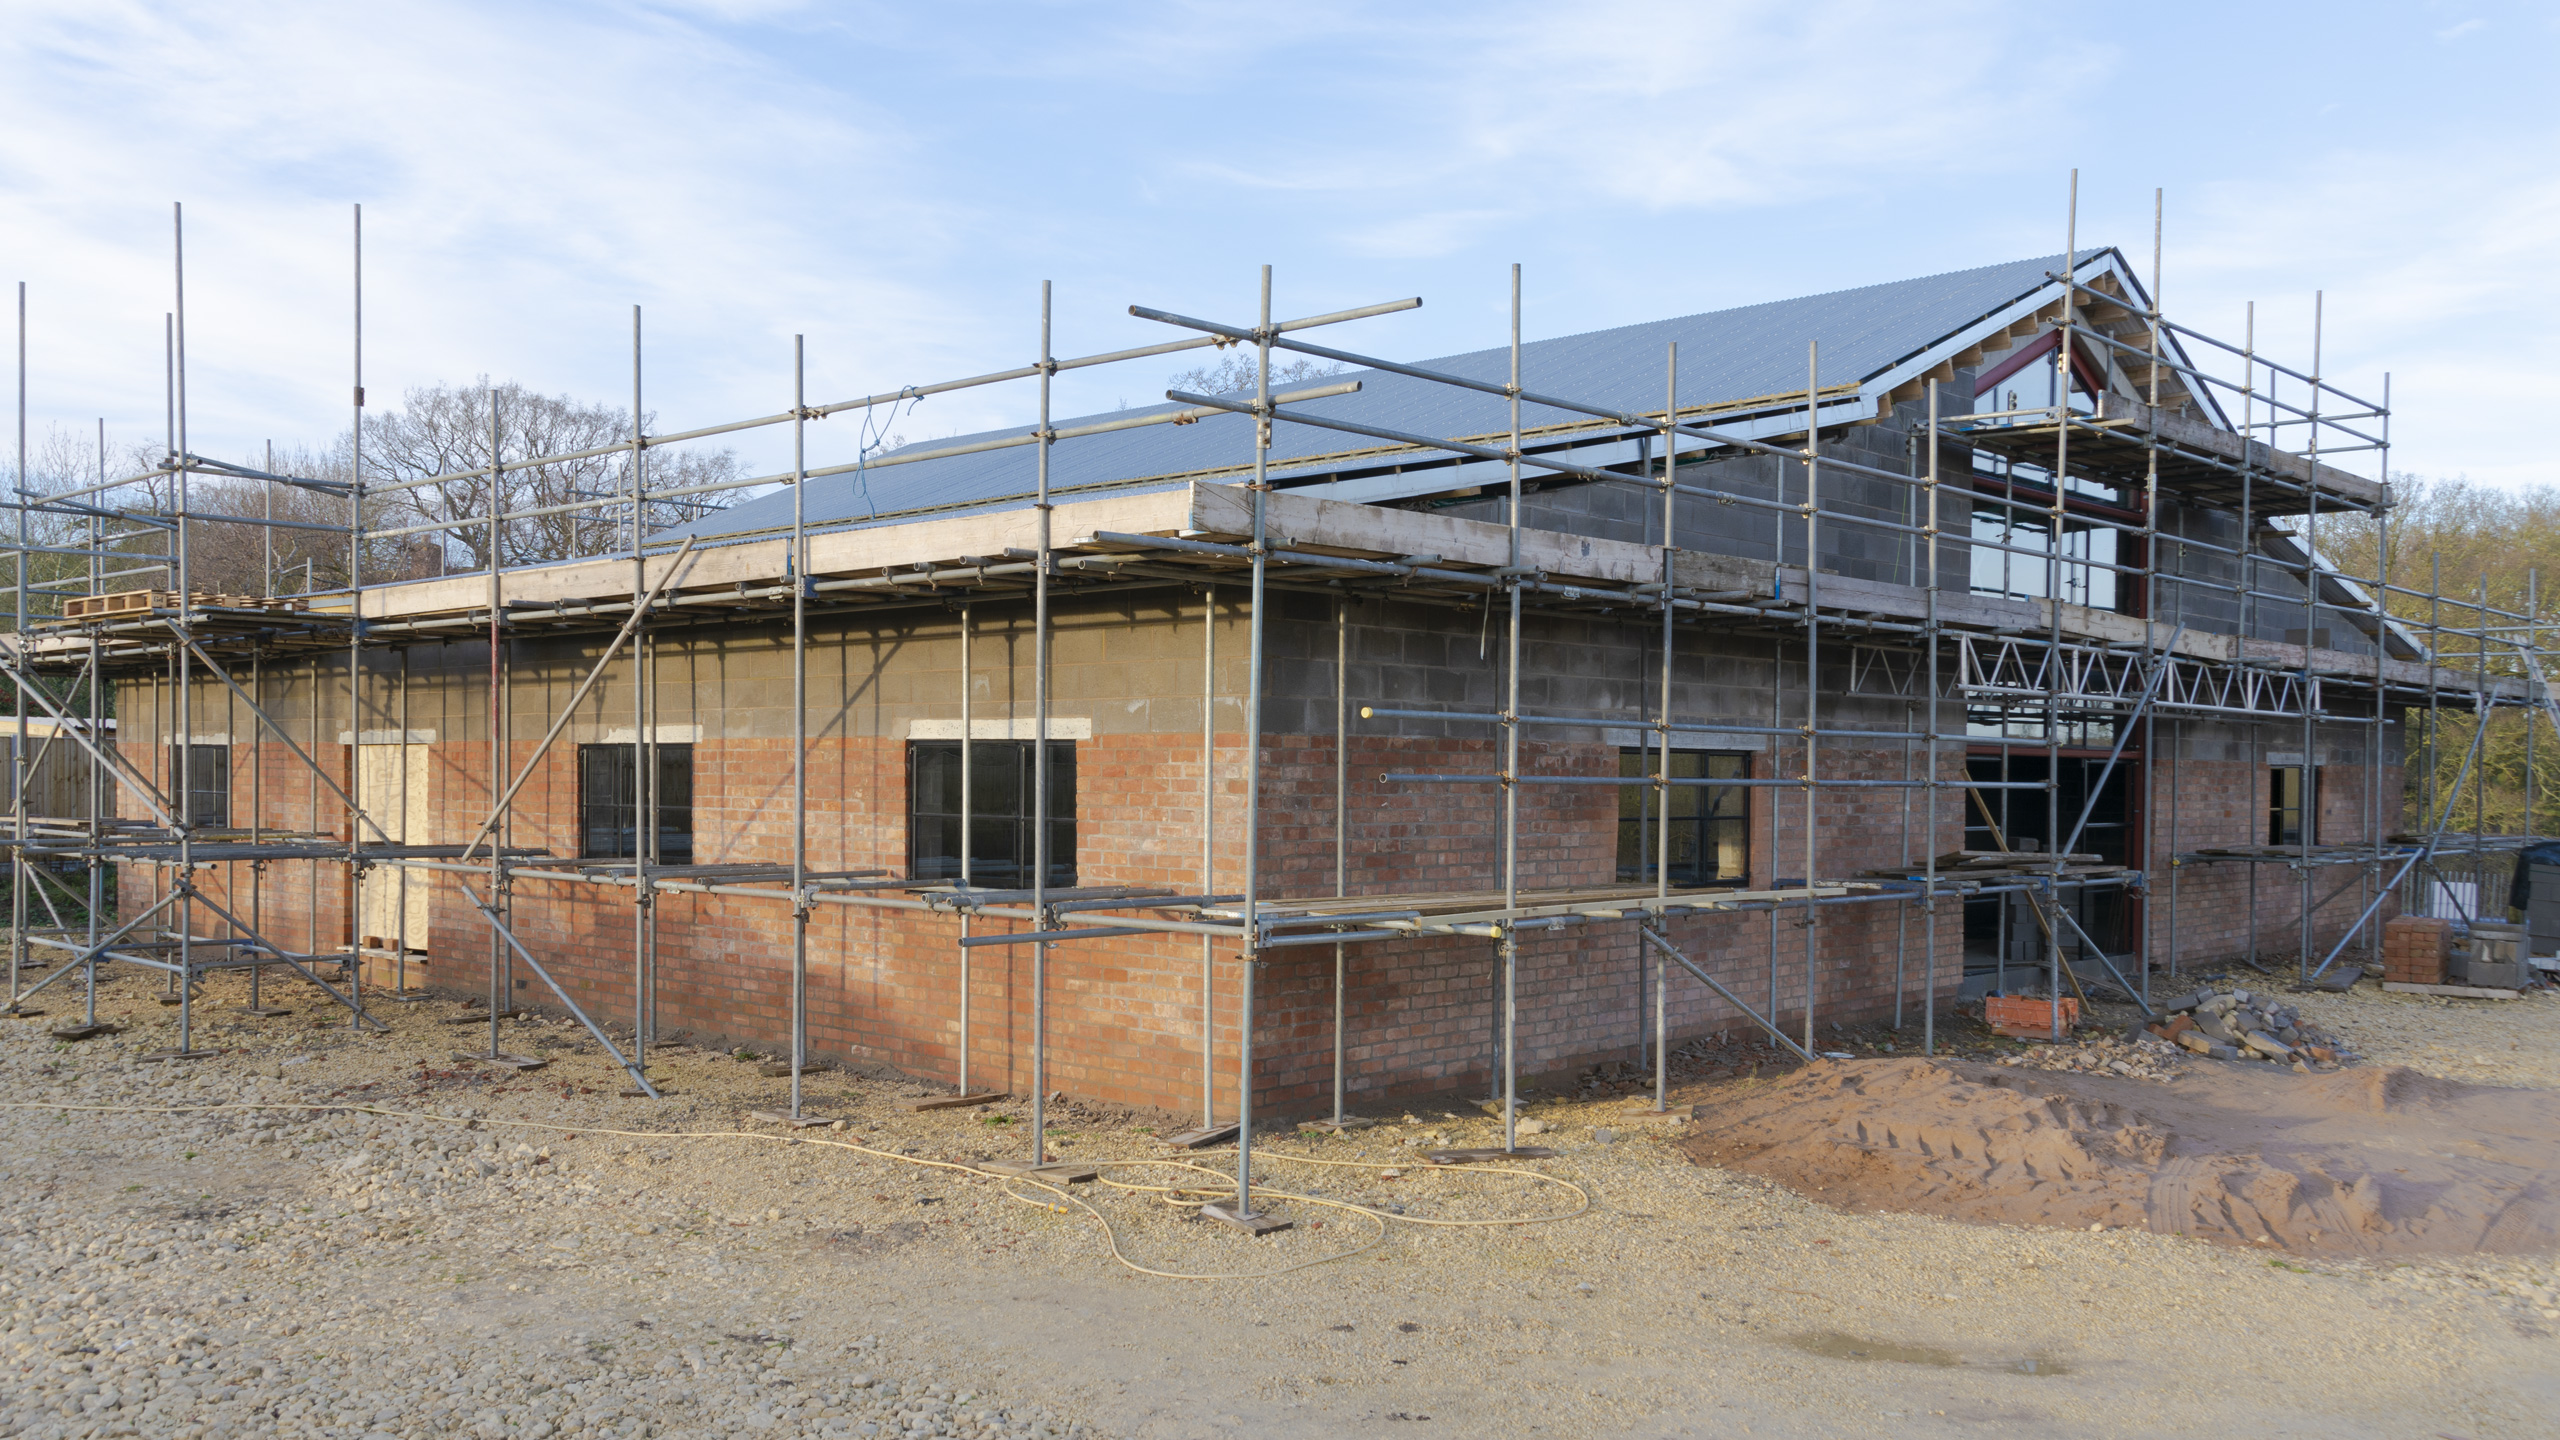 Dec 2019: External construction has progressed well despite poor weather with the roofing and glazing almost complete.